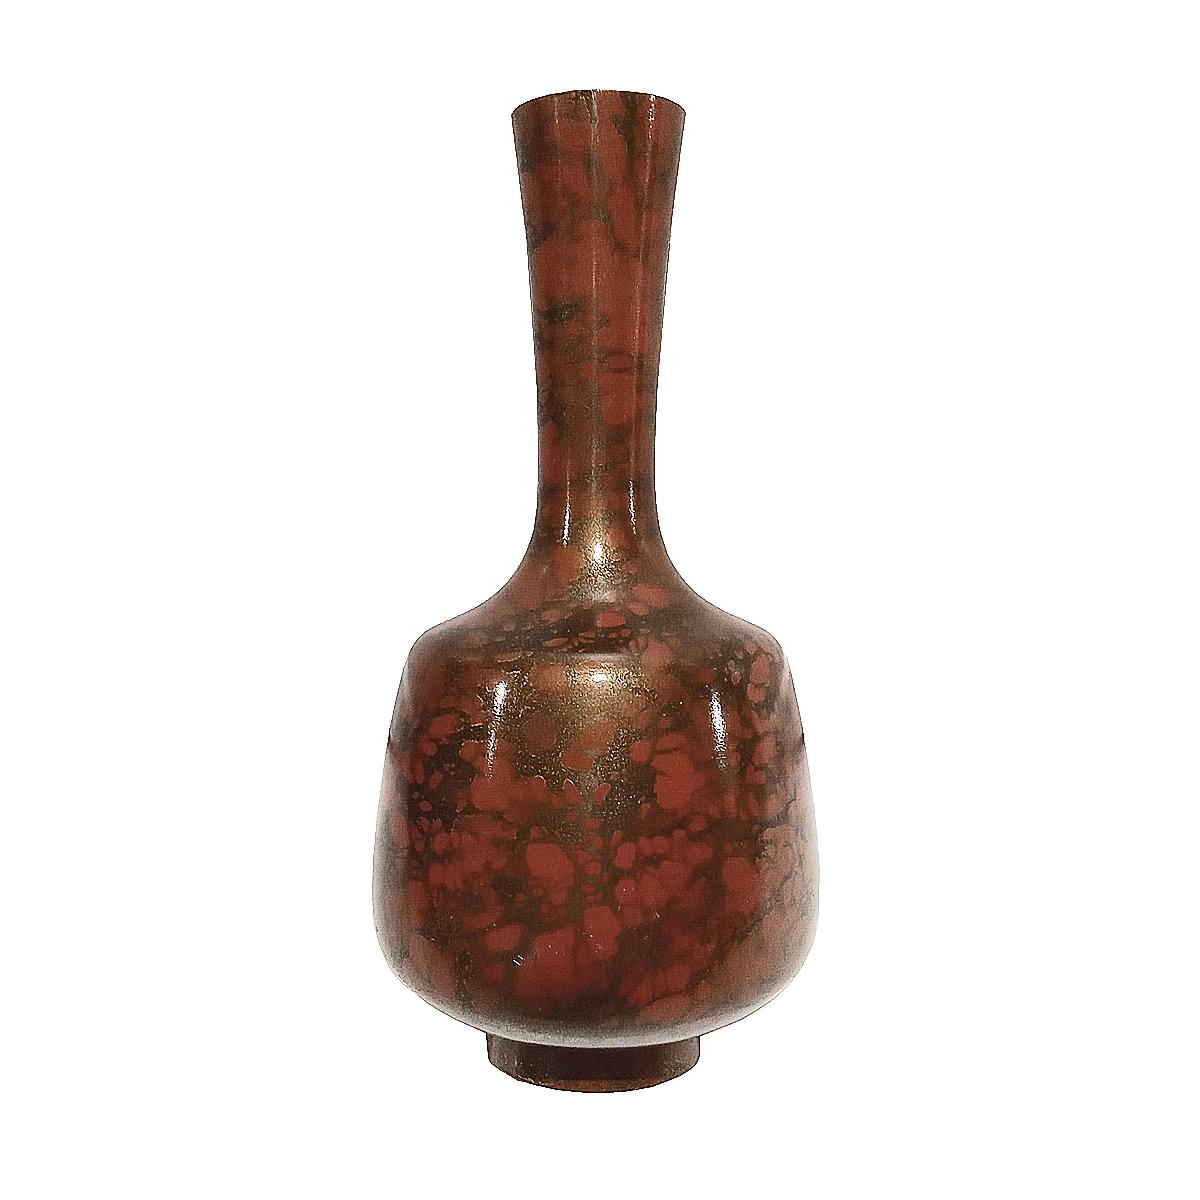 A fabulous Ikebana brass vase, hand-crafted in Japan, Showa Period. The finish is Murashido, a centuries-old technique that consists in dipping the cast brass in oil and smoke it with rice straw, which gives the vase that beautiful mottled patina.